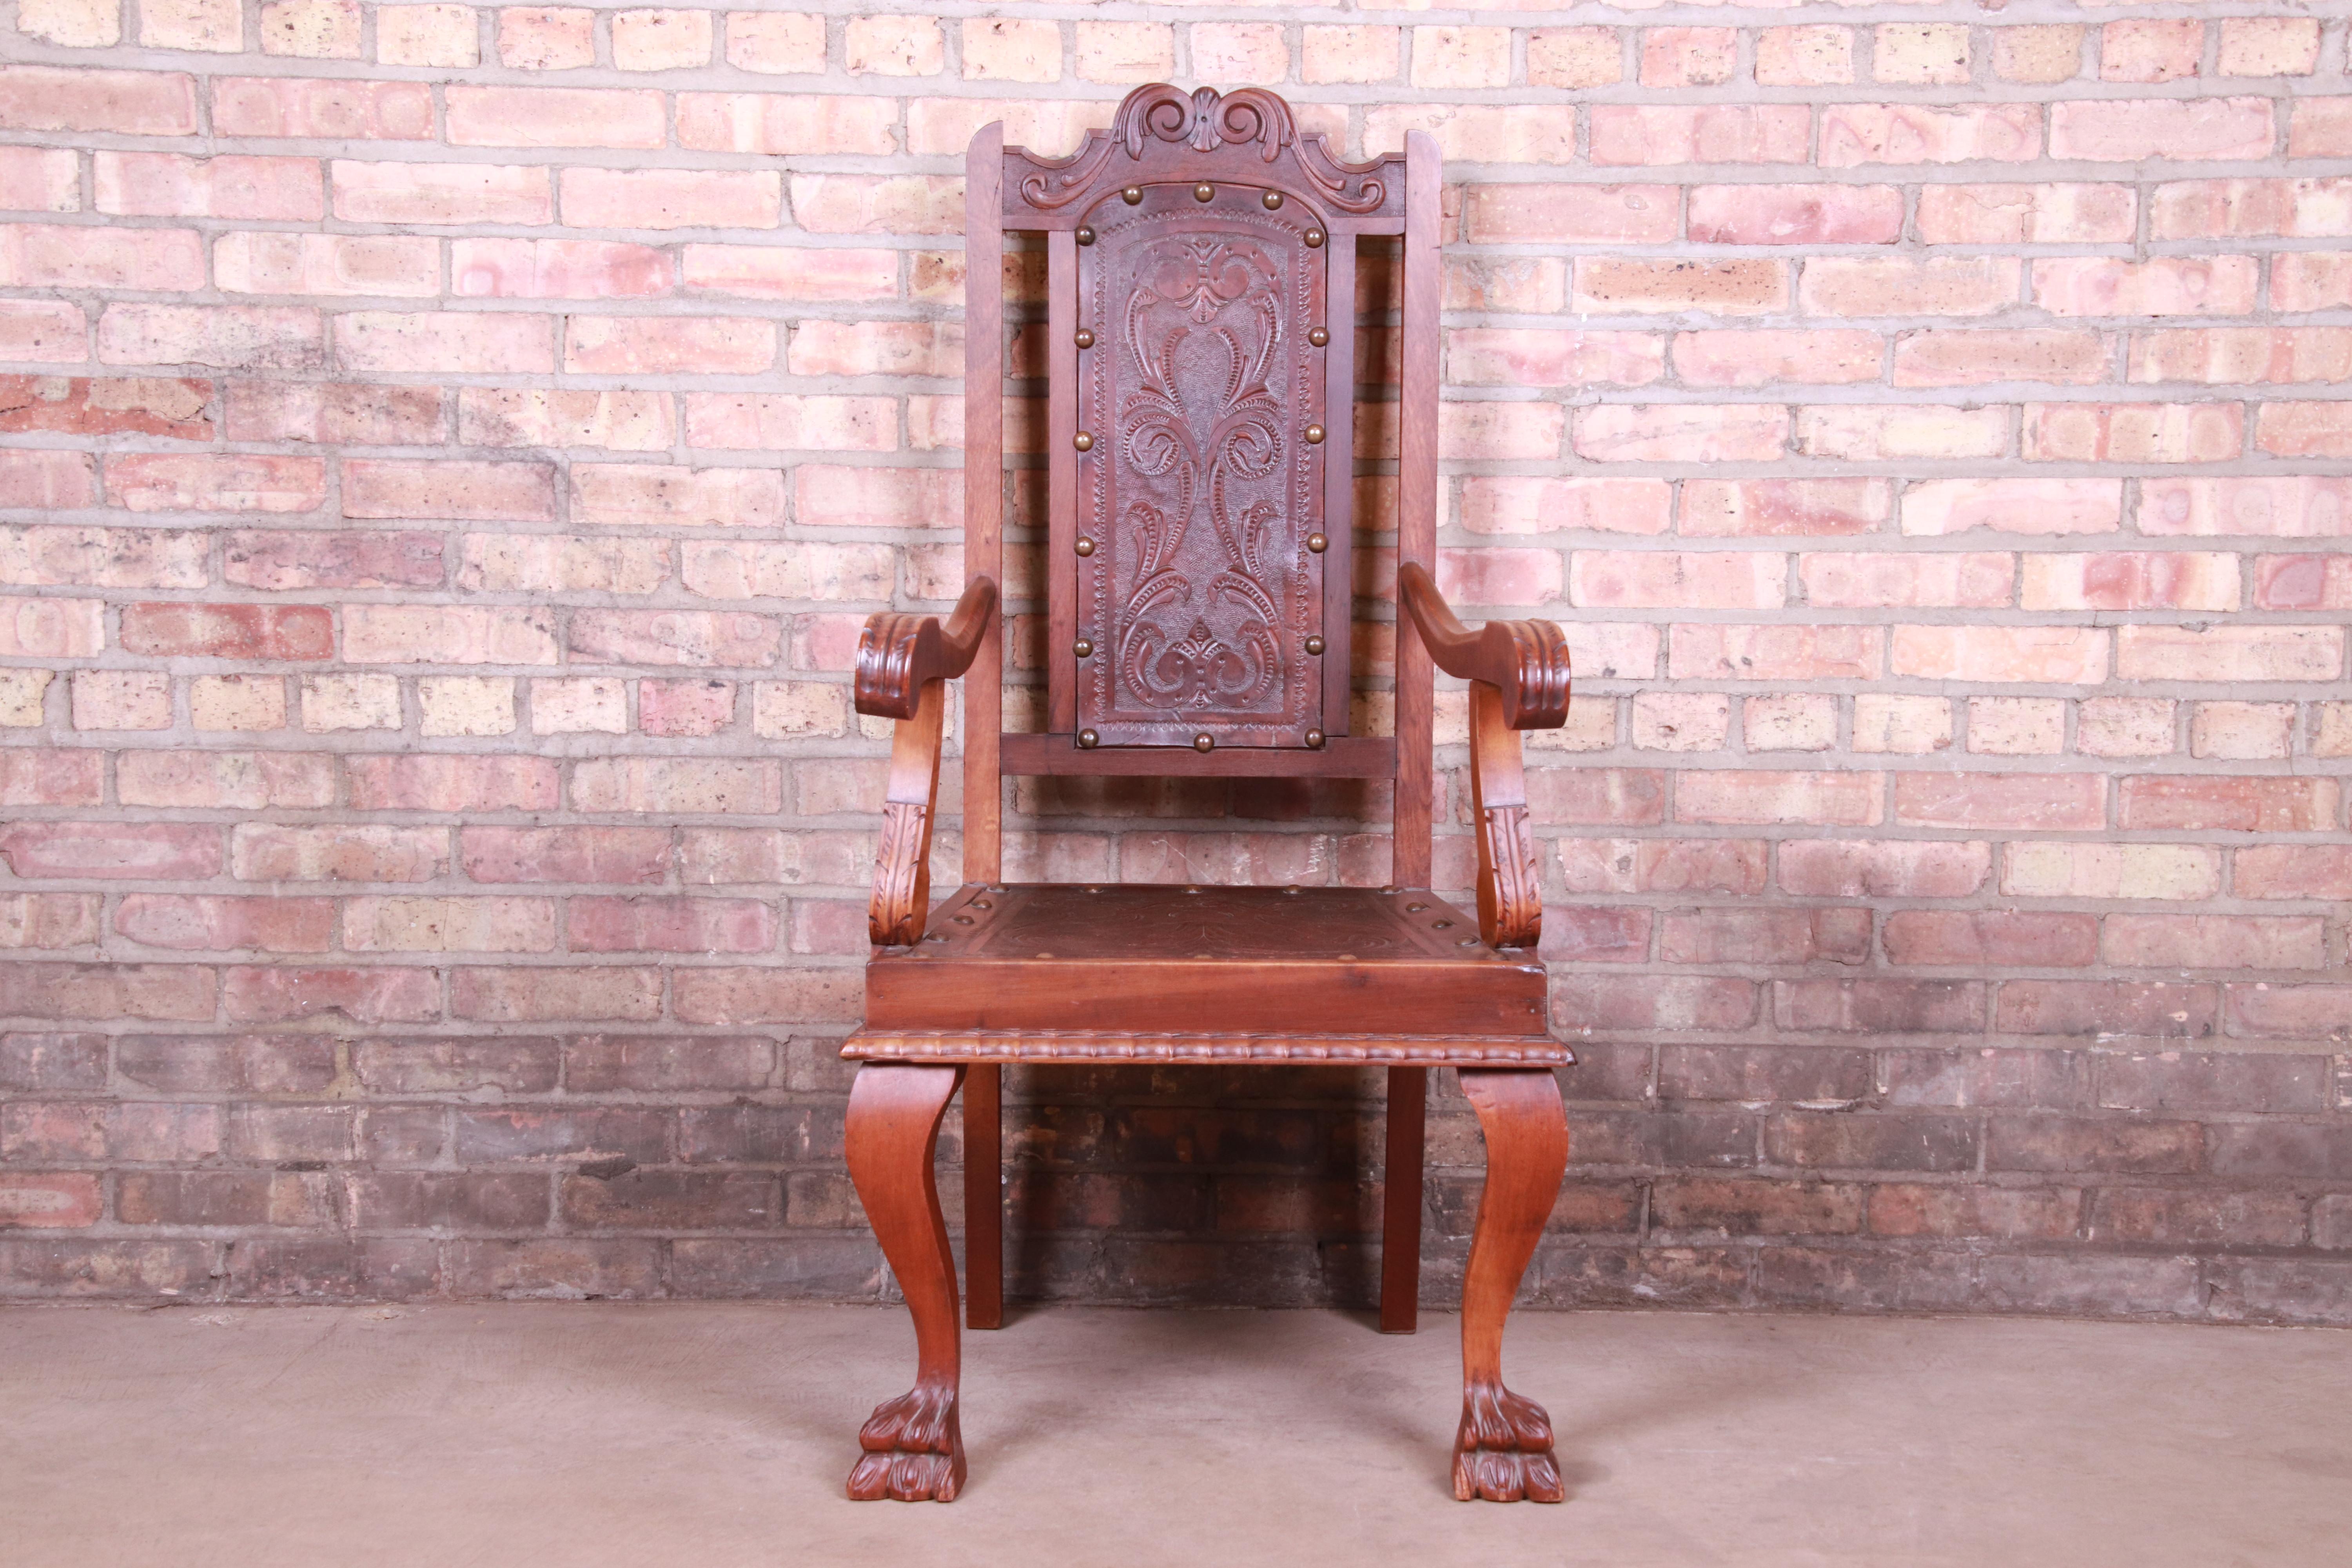 An exceptional antique desk chair or throne chair

By Francisco Bergamo Sobrinho for Móveis Bergamo

Brazil, 1930s

Carved walnut, with embossed leather seat and back.

Measures: 23.25